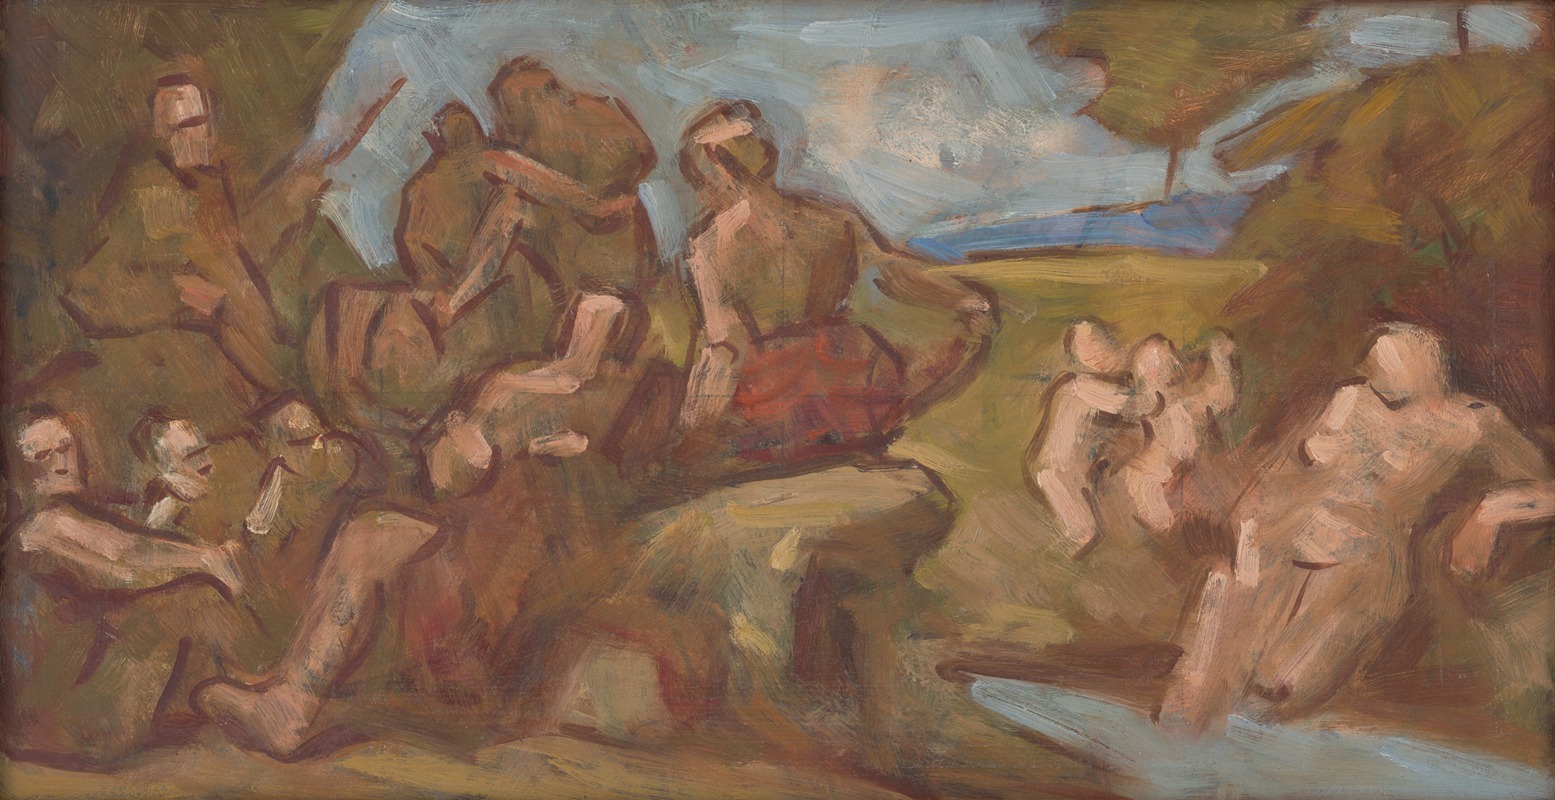 Milan Thomka Mitrovský - Sketch of Composition with Bathing People